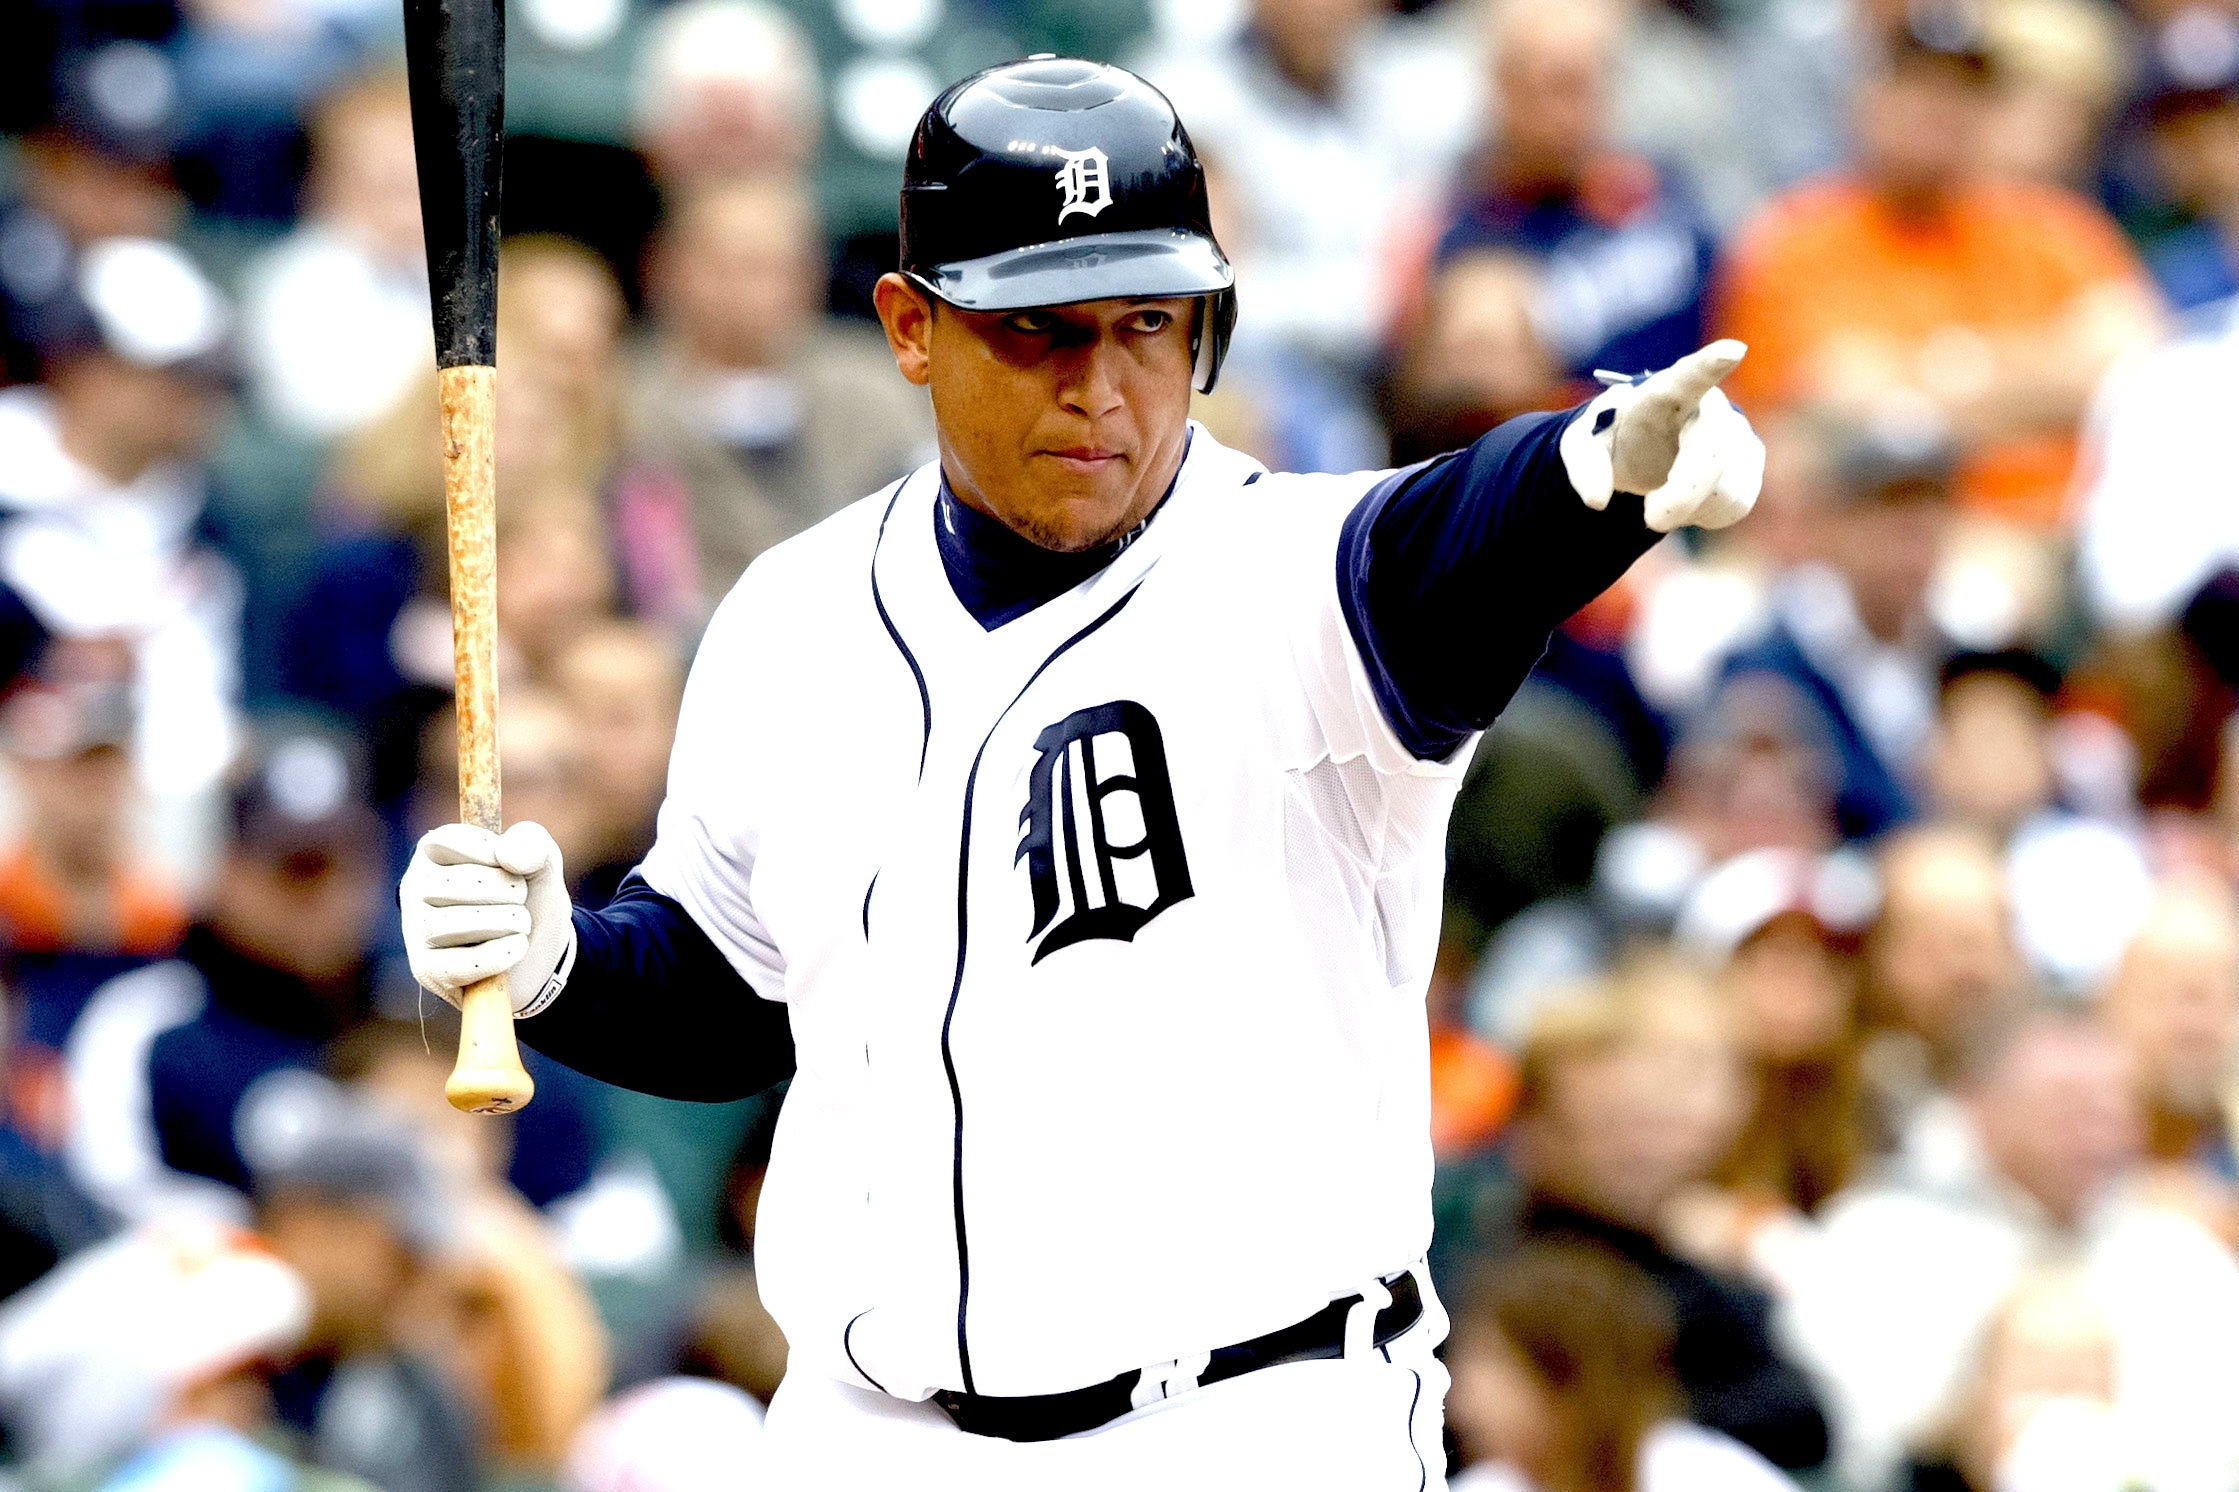 Miguel Cabrera: Detroit Tigers' slugger going out with a whimper